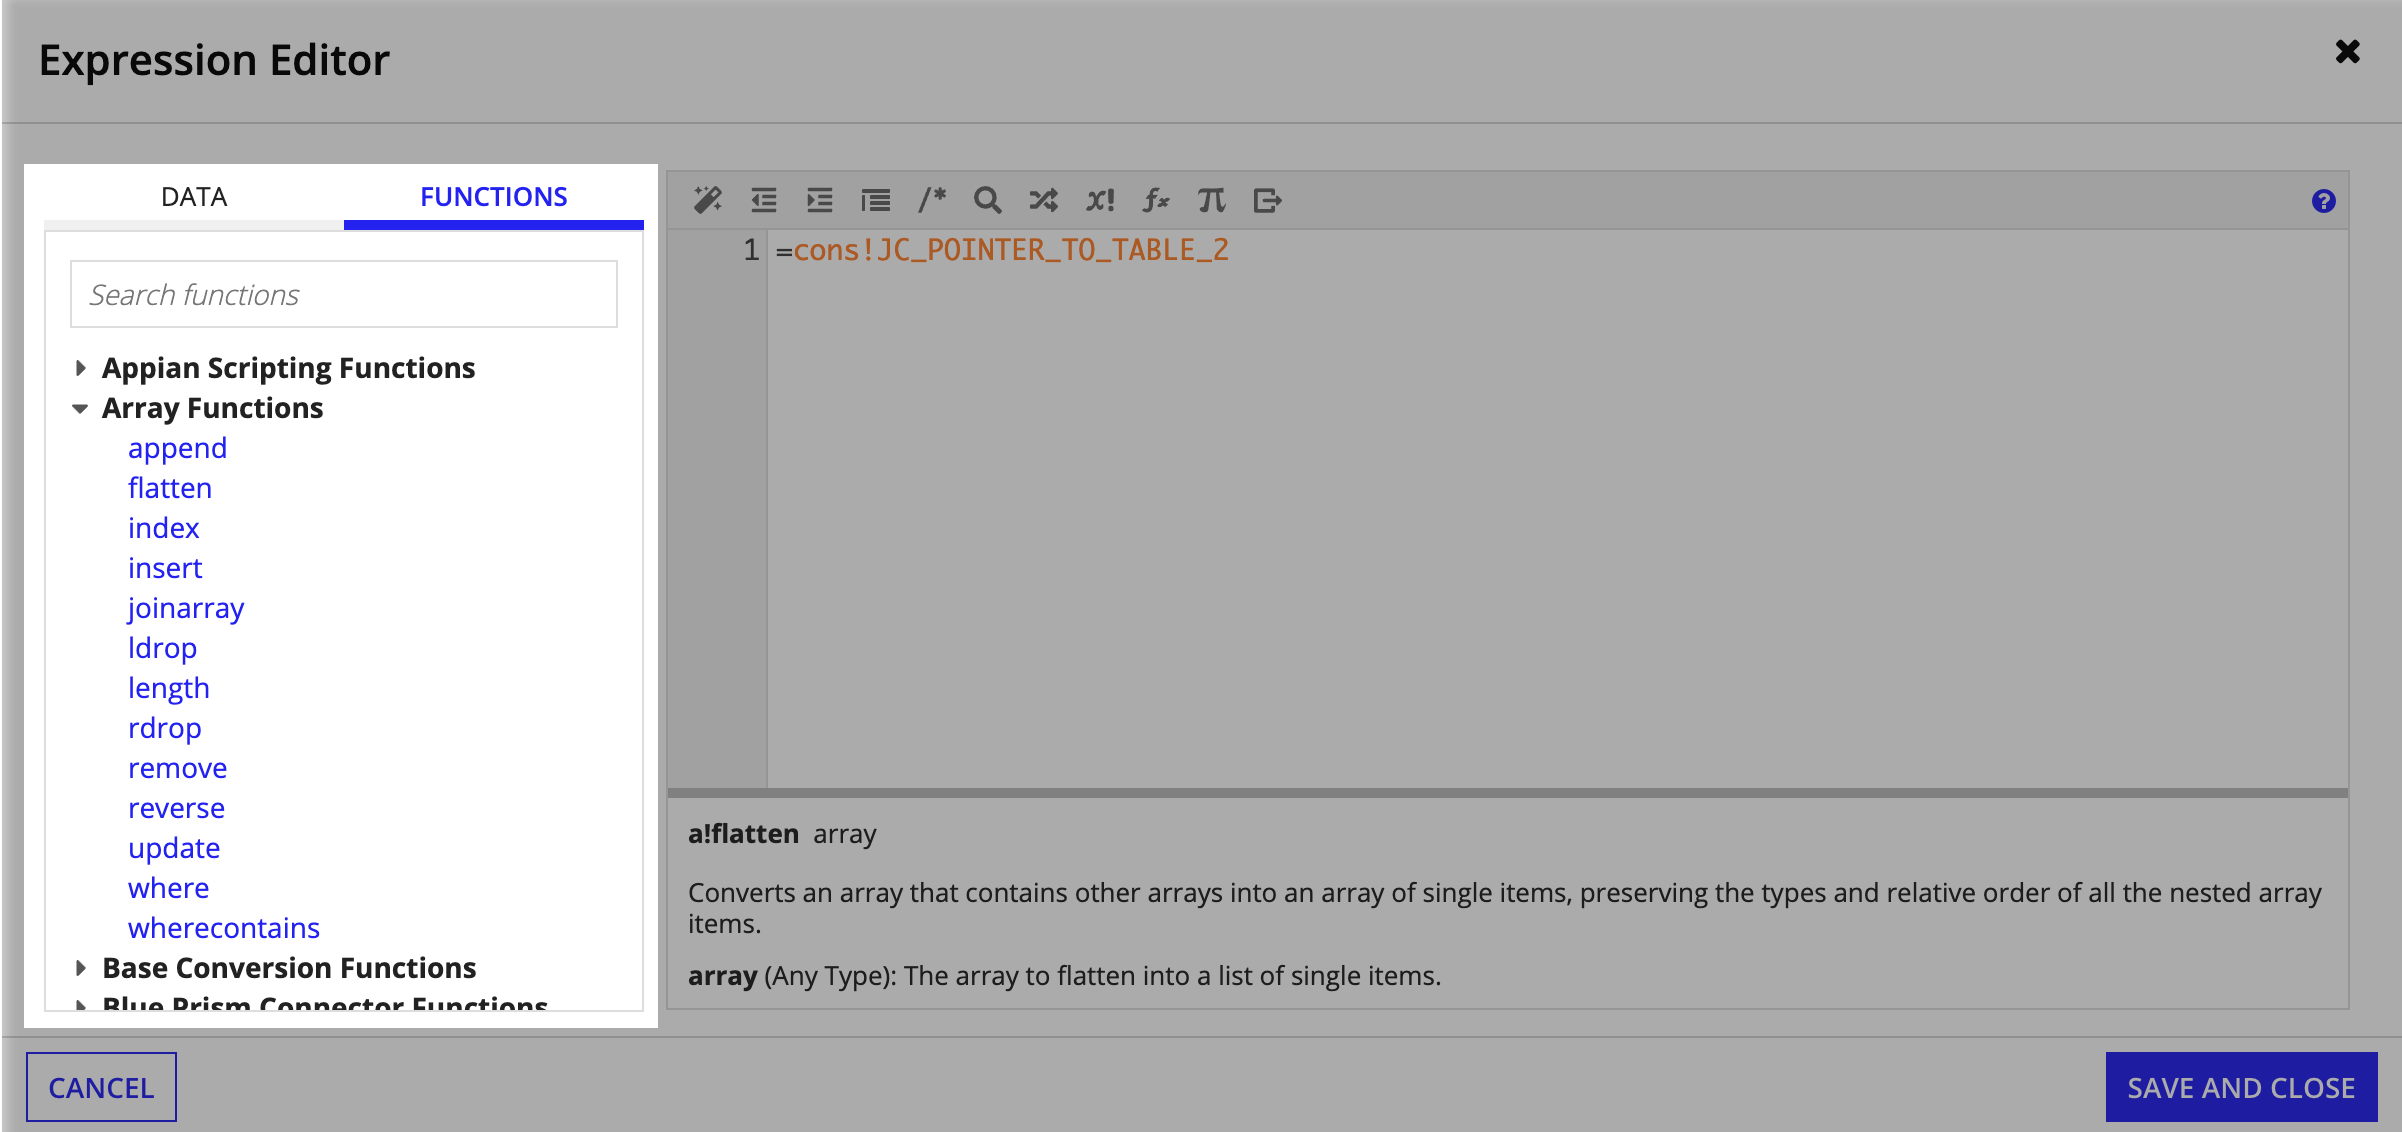 screenshot of the FUNCTIONS tab in the Expression Editor in process model